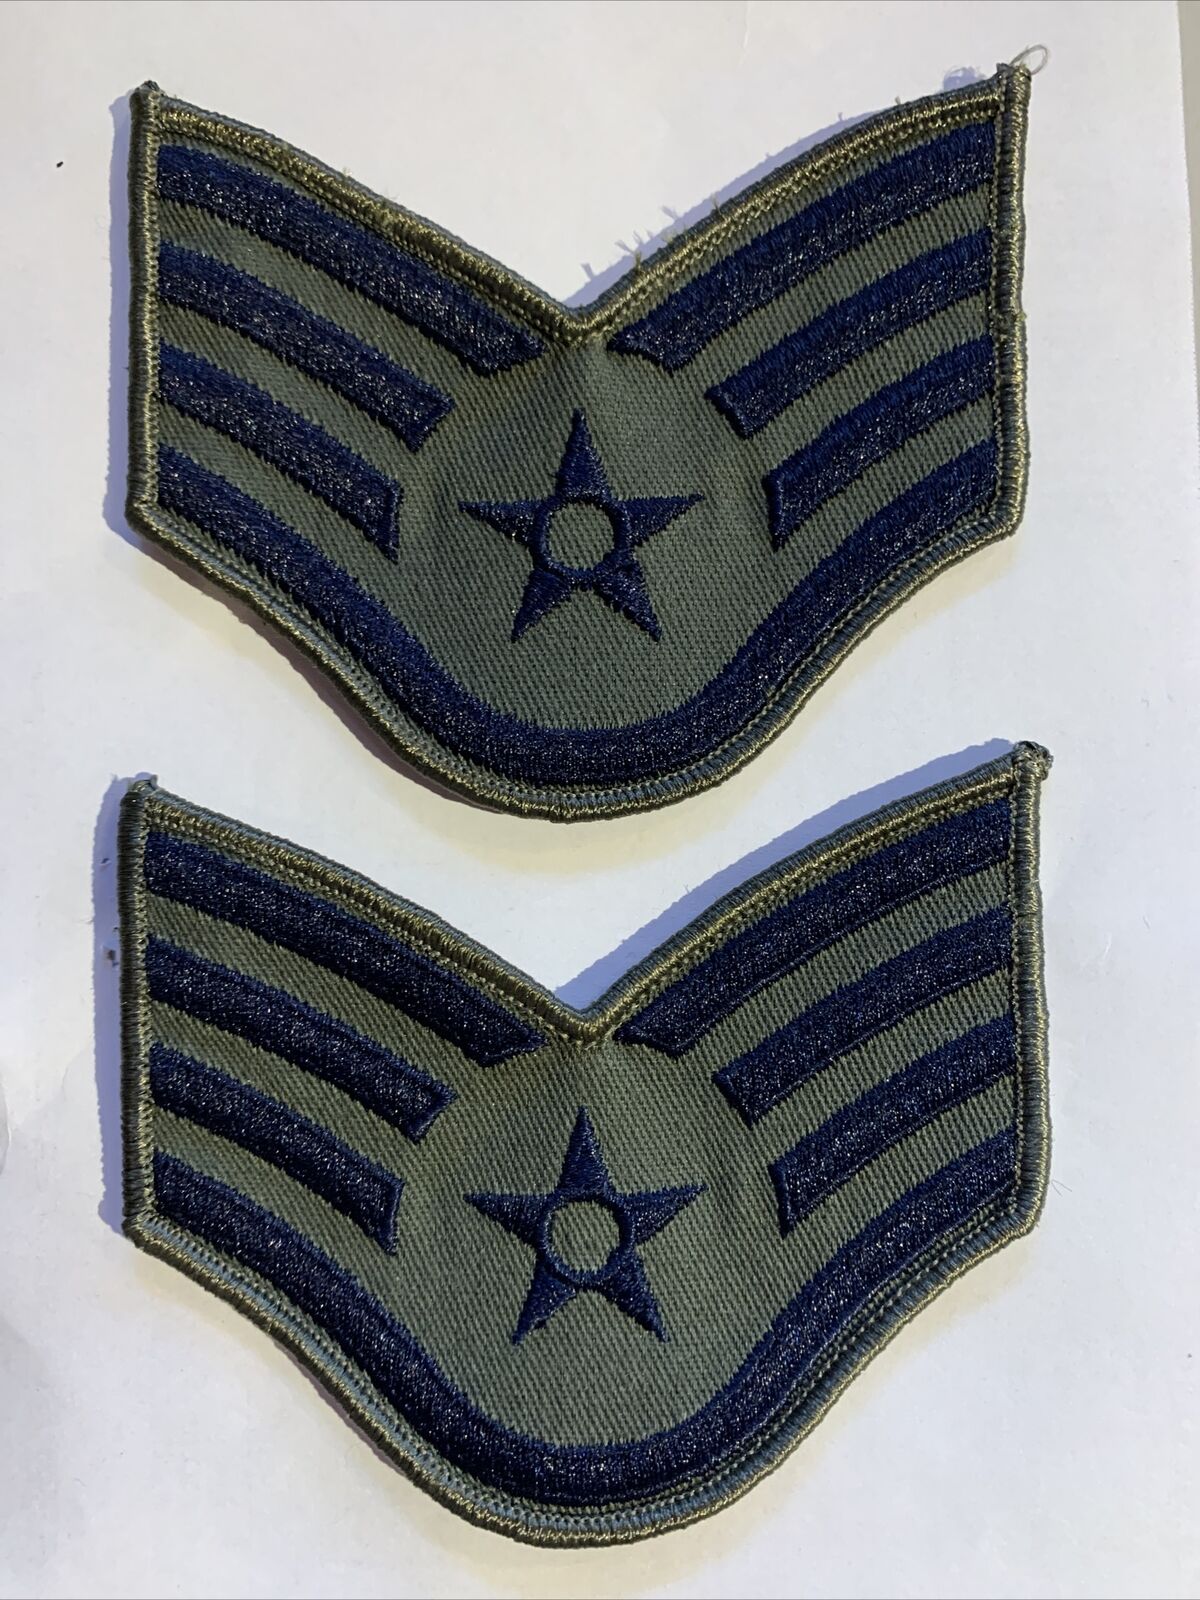 One (1) Pair of US Air Force Staff Sergeant Rank Subdued Chevron Patches